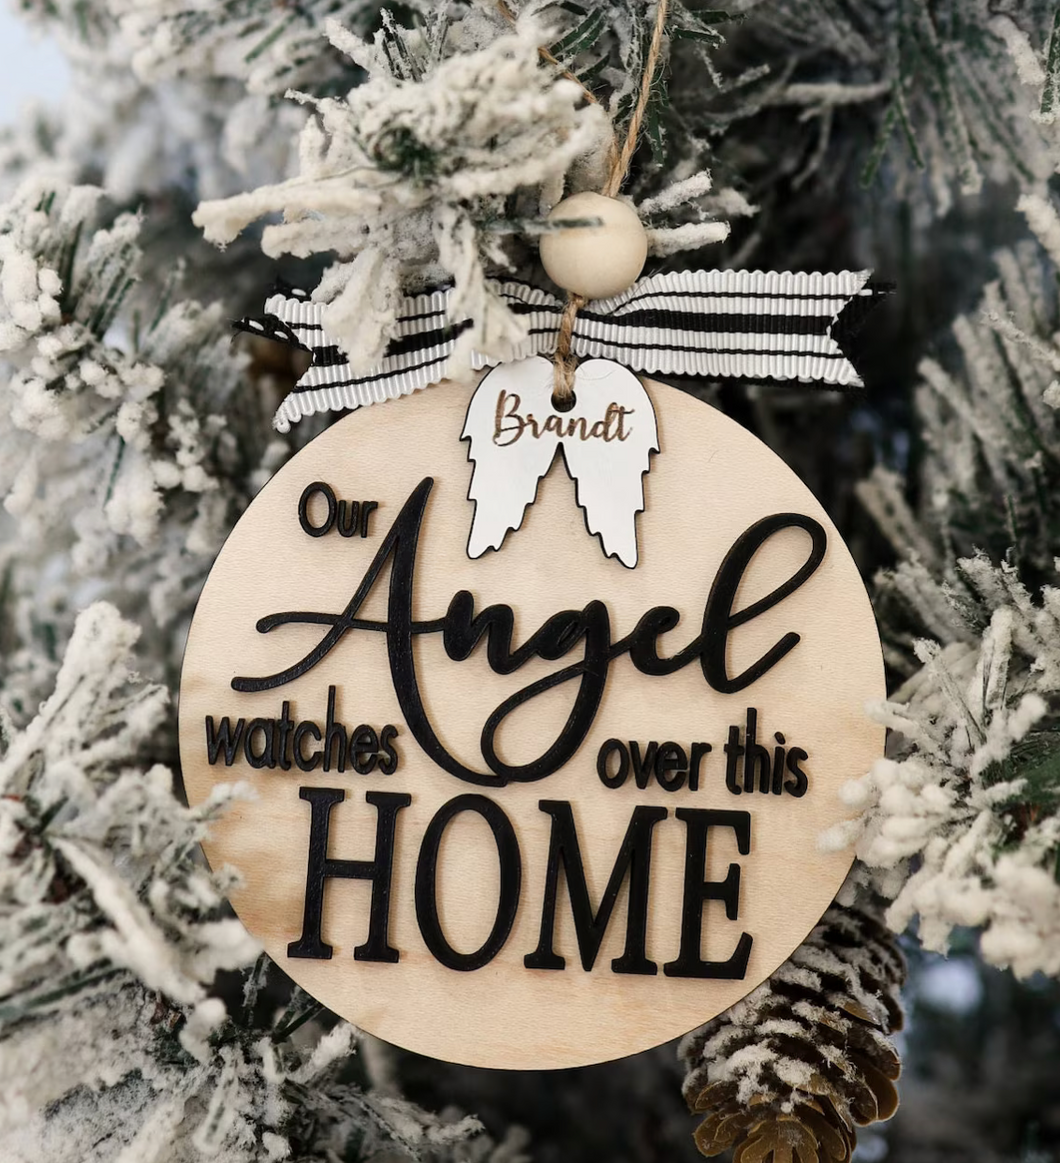 Our Angel Watches Over This Home Ornament